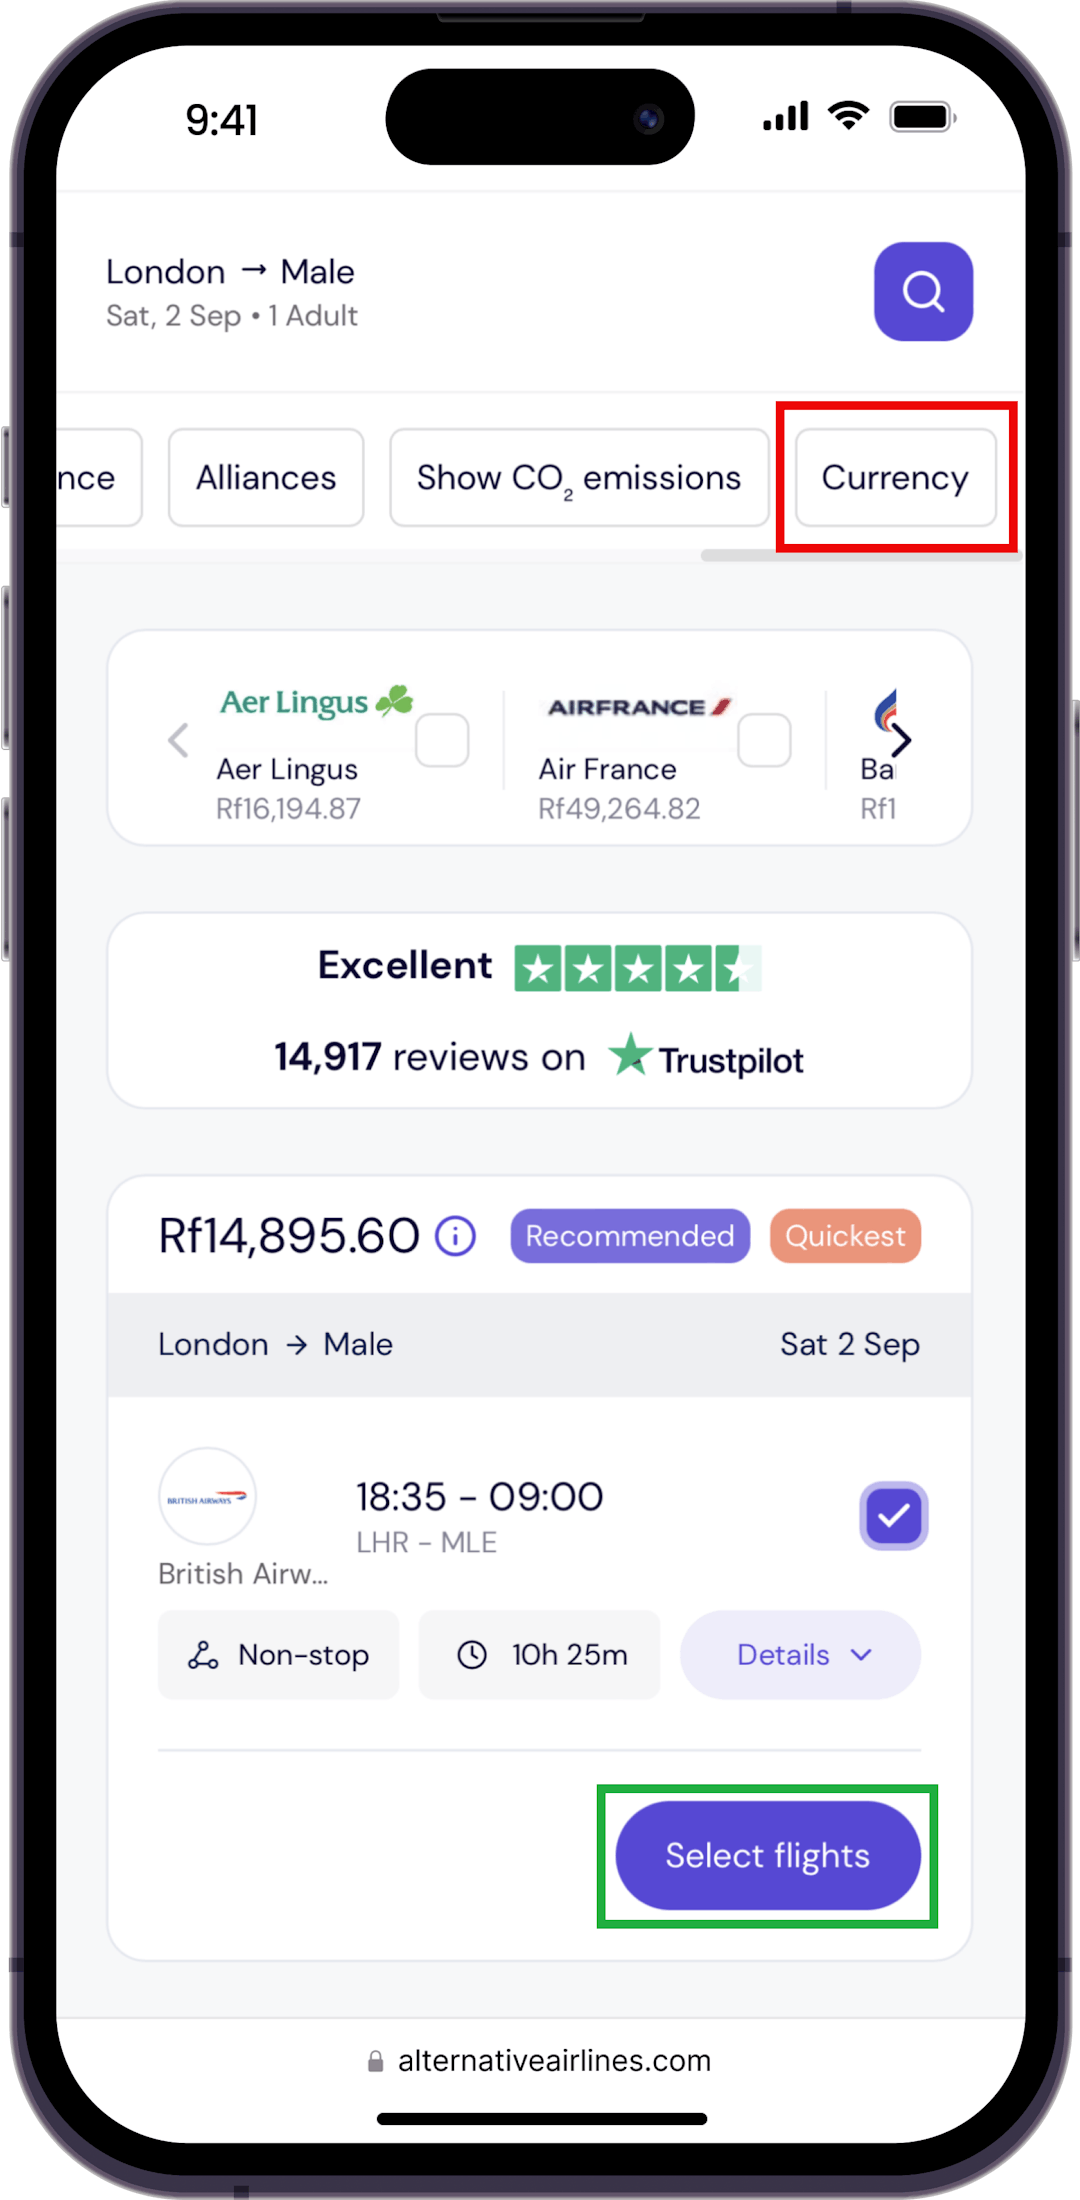 Step 4 - Select Flights and Confirm Booking